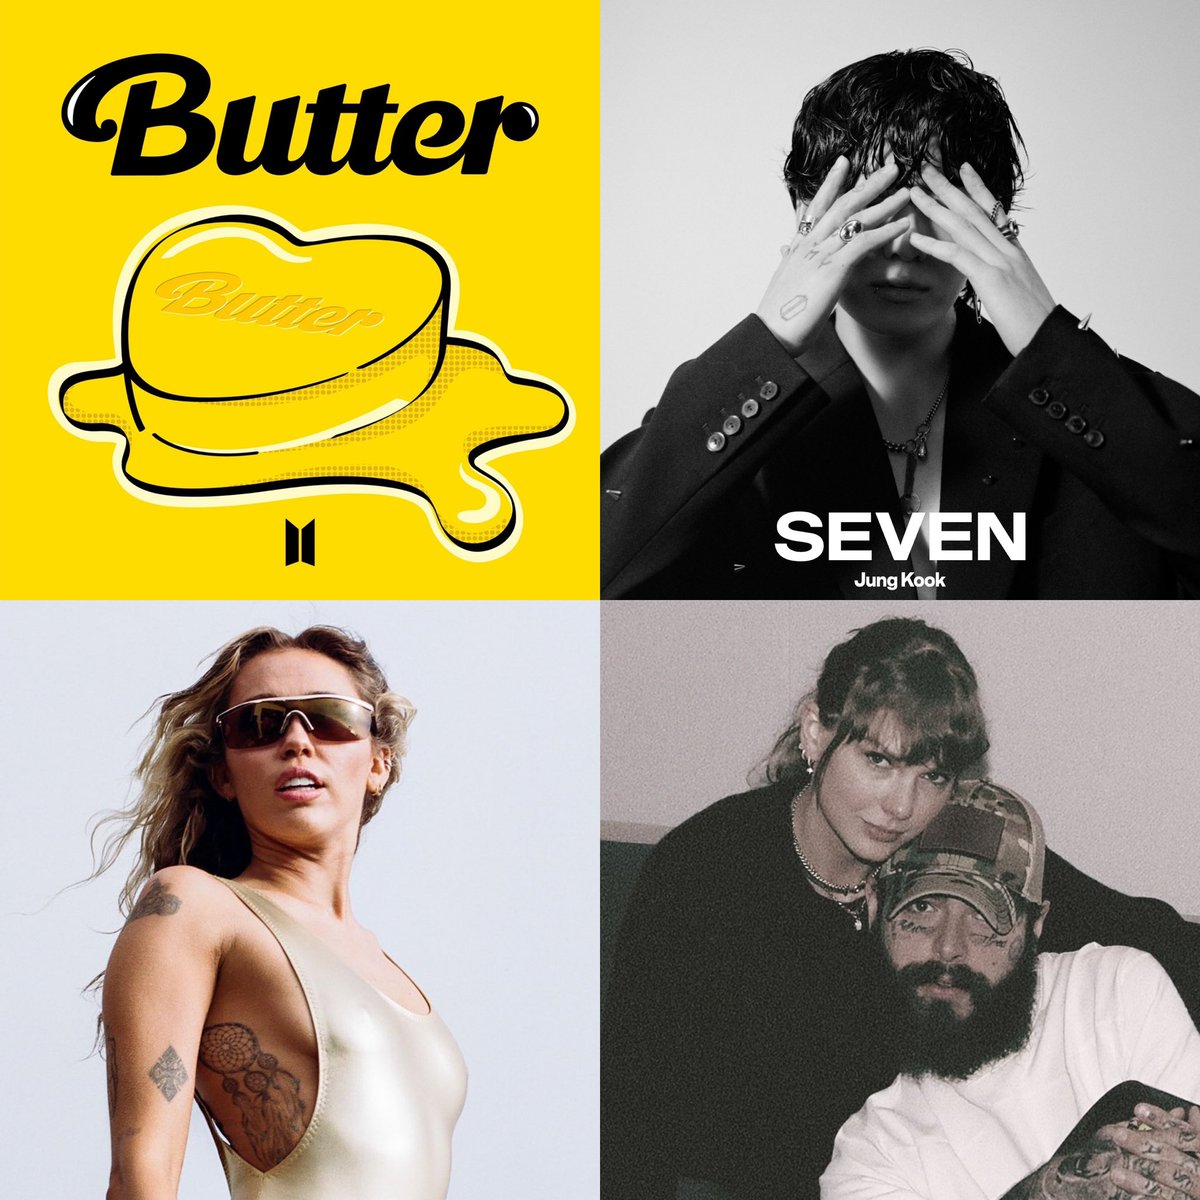 Biggest streaming weeks in Billboard Global 200 history: Butter 289M Seven 217M Flowers 217M Pink Venom 212M Flowers 186M Flowers 179M Easy On Me 178M Fortnight 177M Permission To Dance 171M Butter 170M